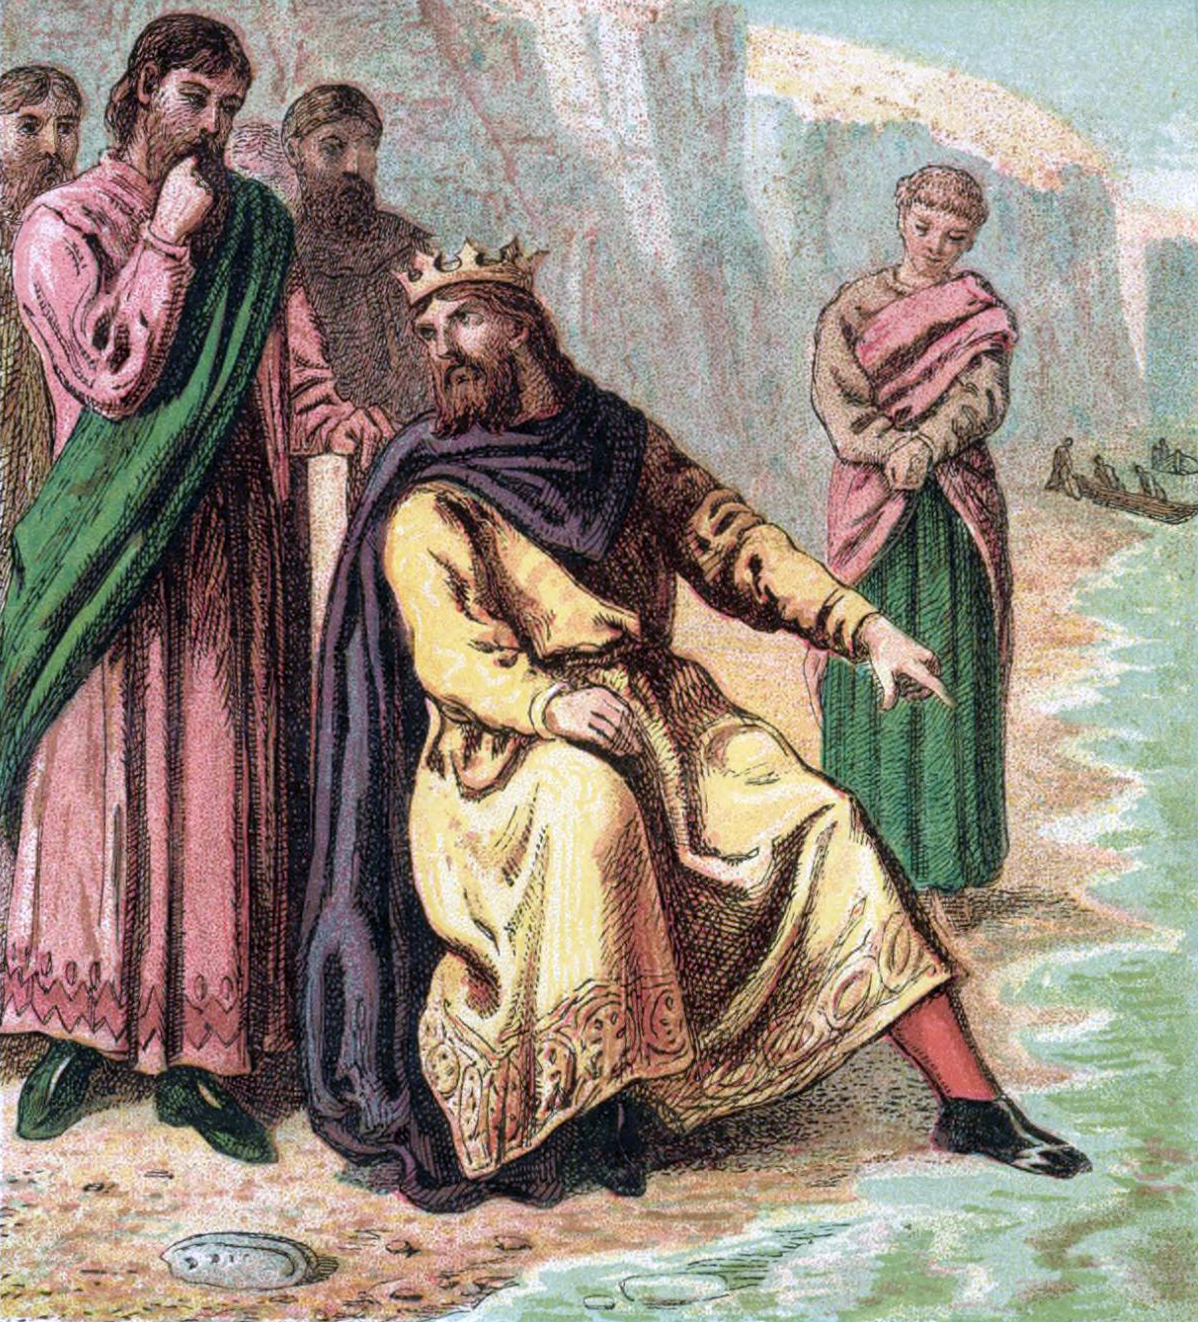 KING CANUTE THE GREAT - Naked History